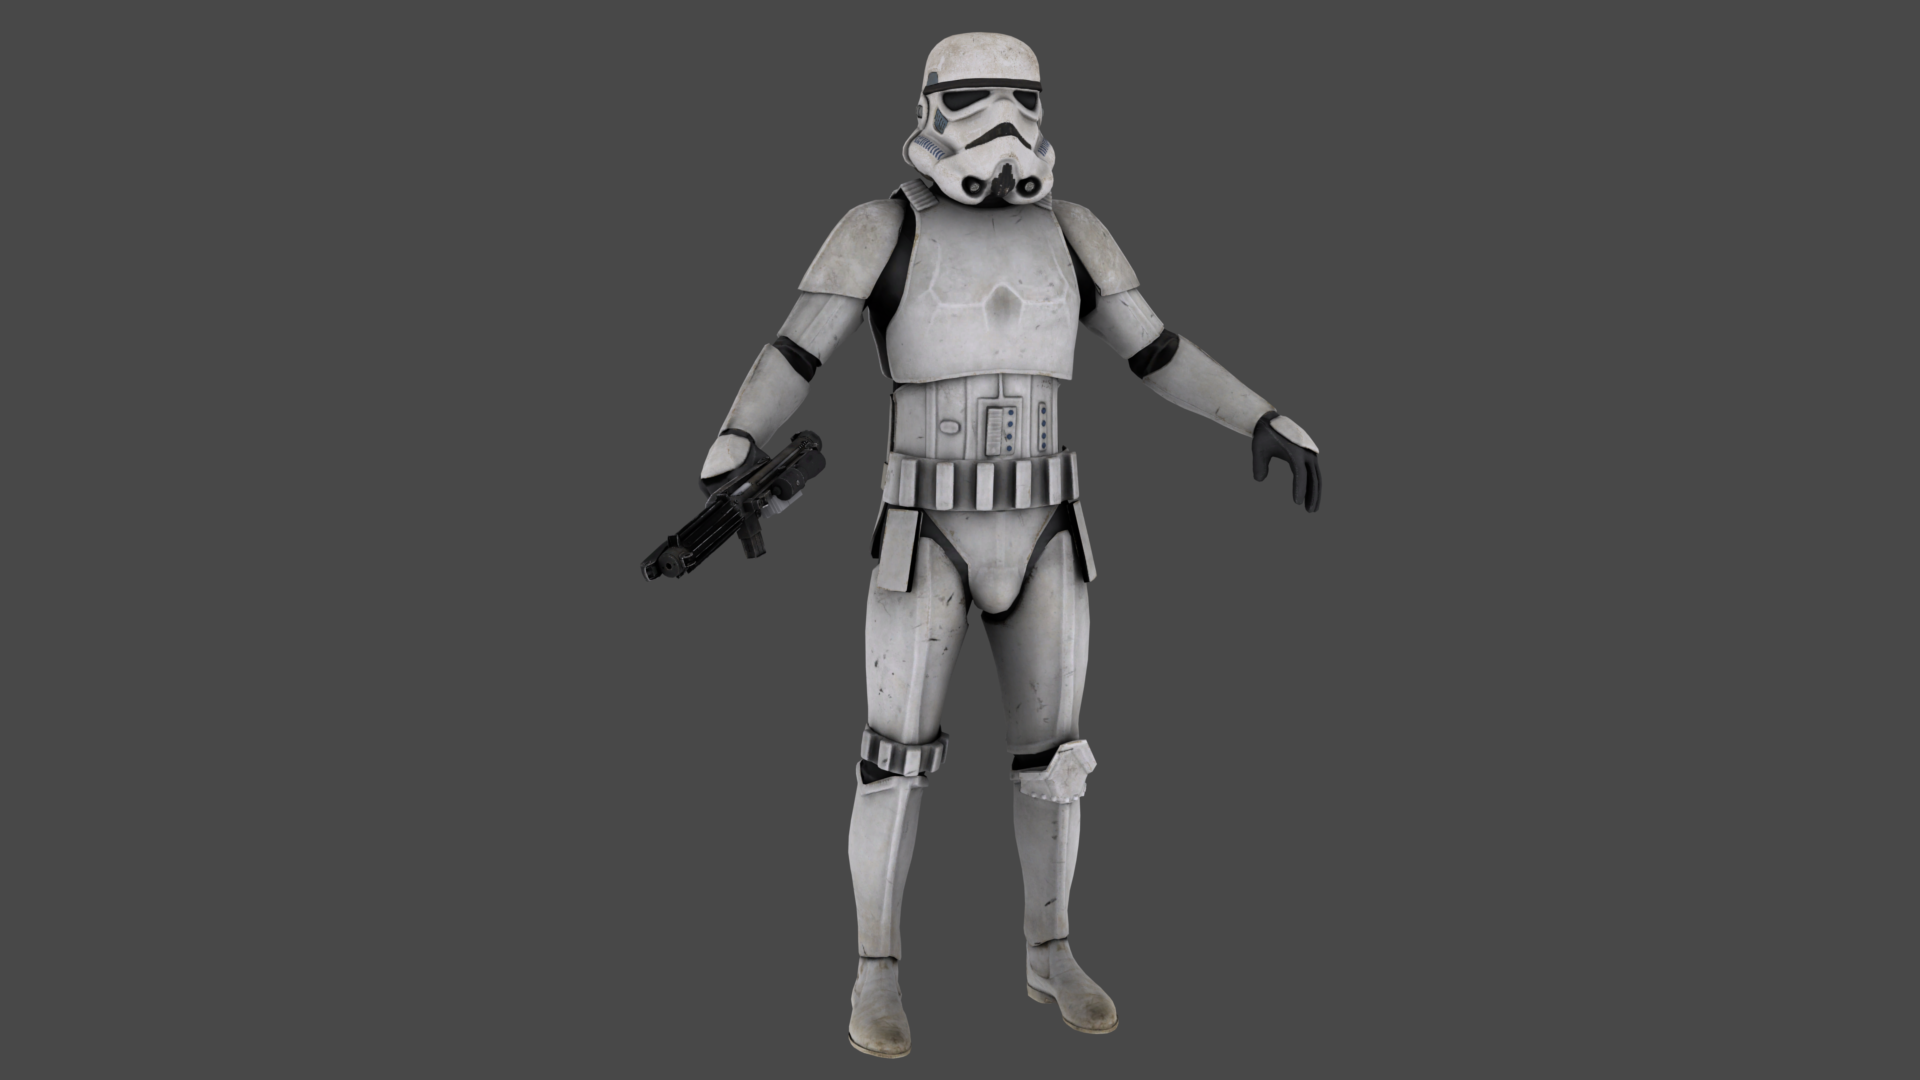 Imperial Remnant Soldiers Image Star Wars Shattered Empire Mod For Star Wars Empire At War Forces Of Corruption Mod Db